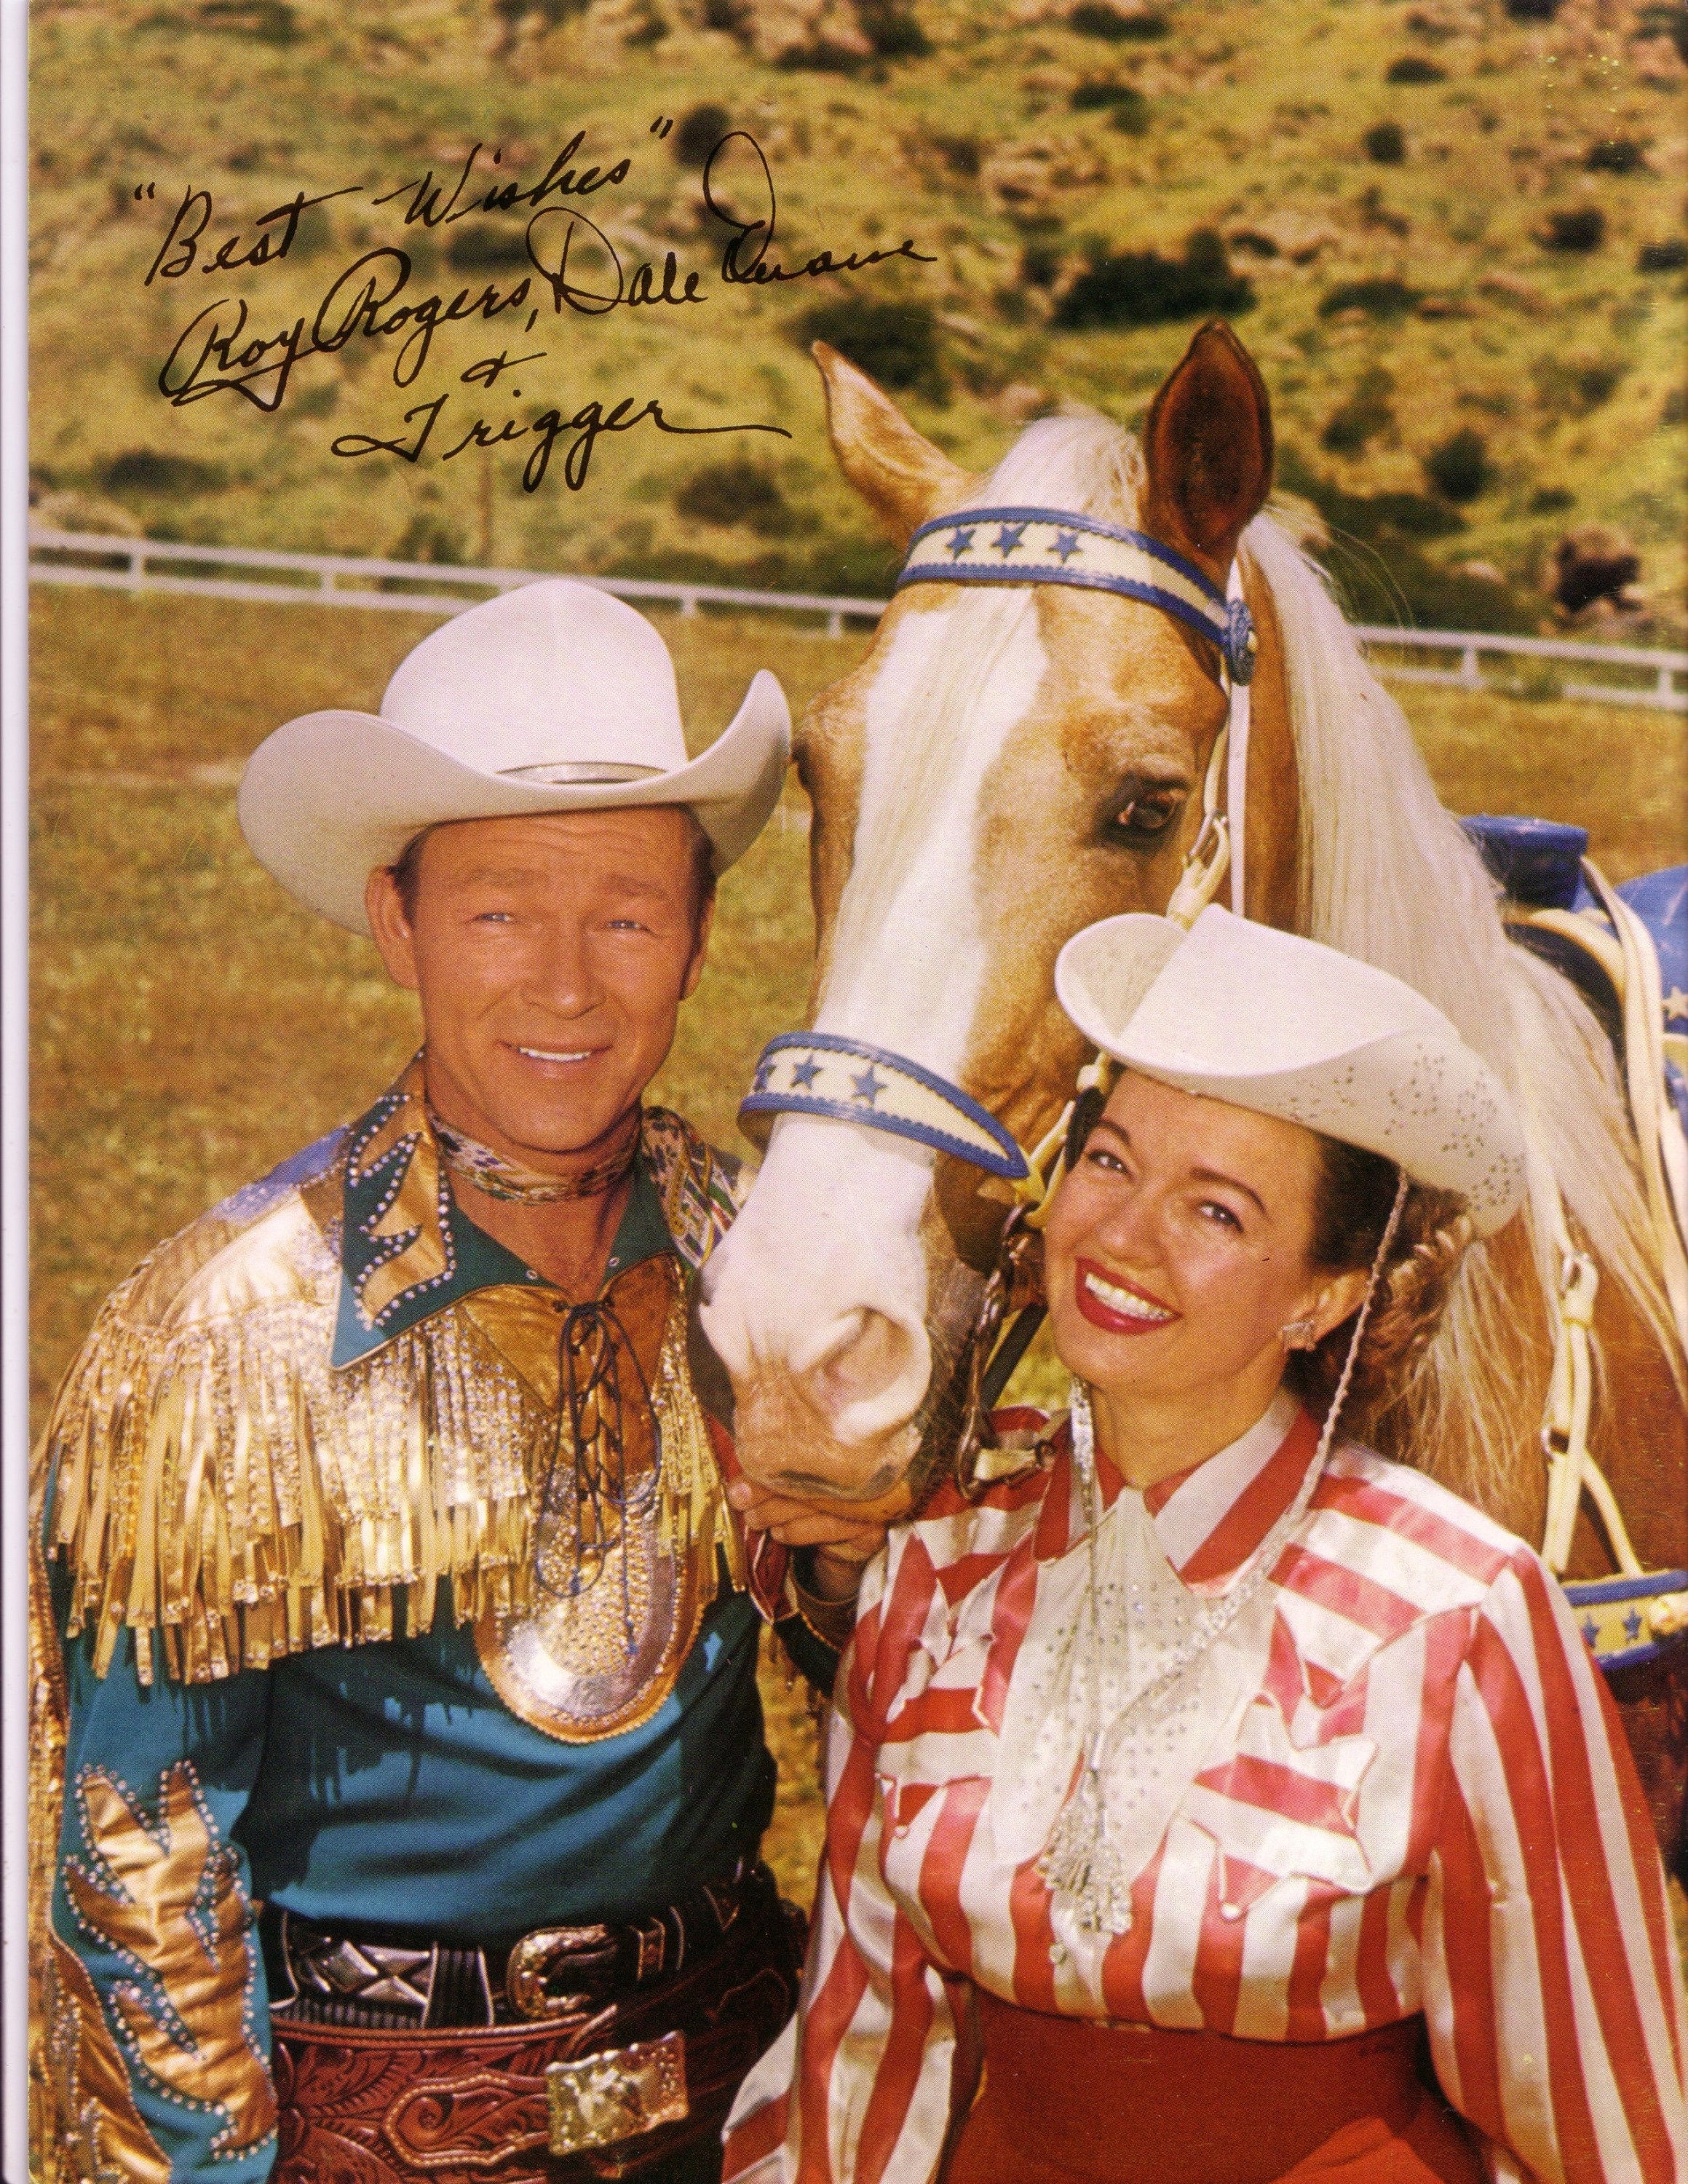 ROY ROGERS & DALE EVANS 8X10 PHOTO TV PICTURE COWBOY WESTERN WITH TRIGGER 